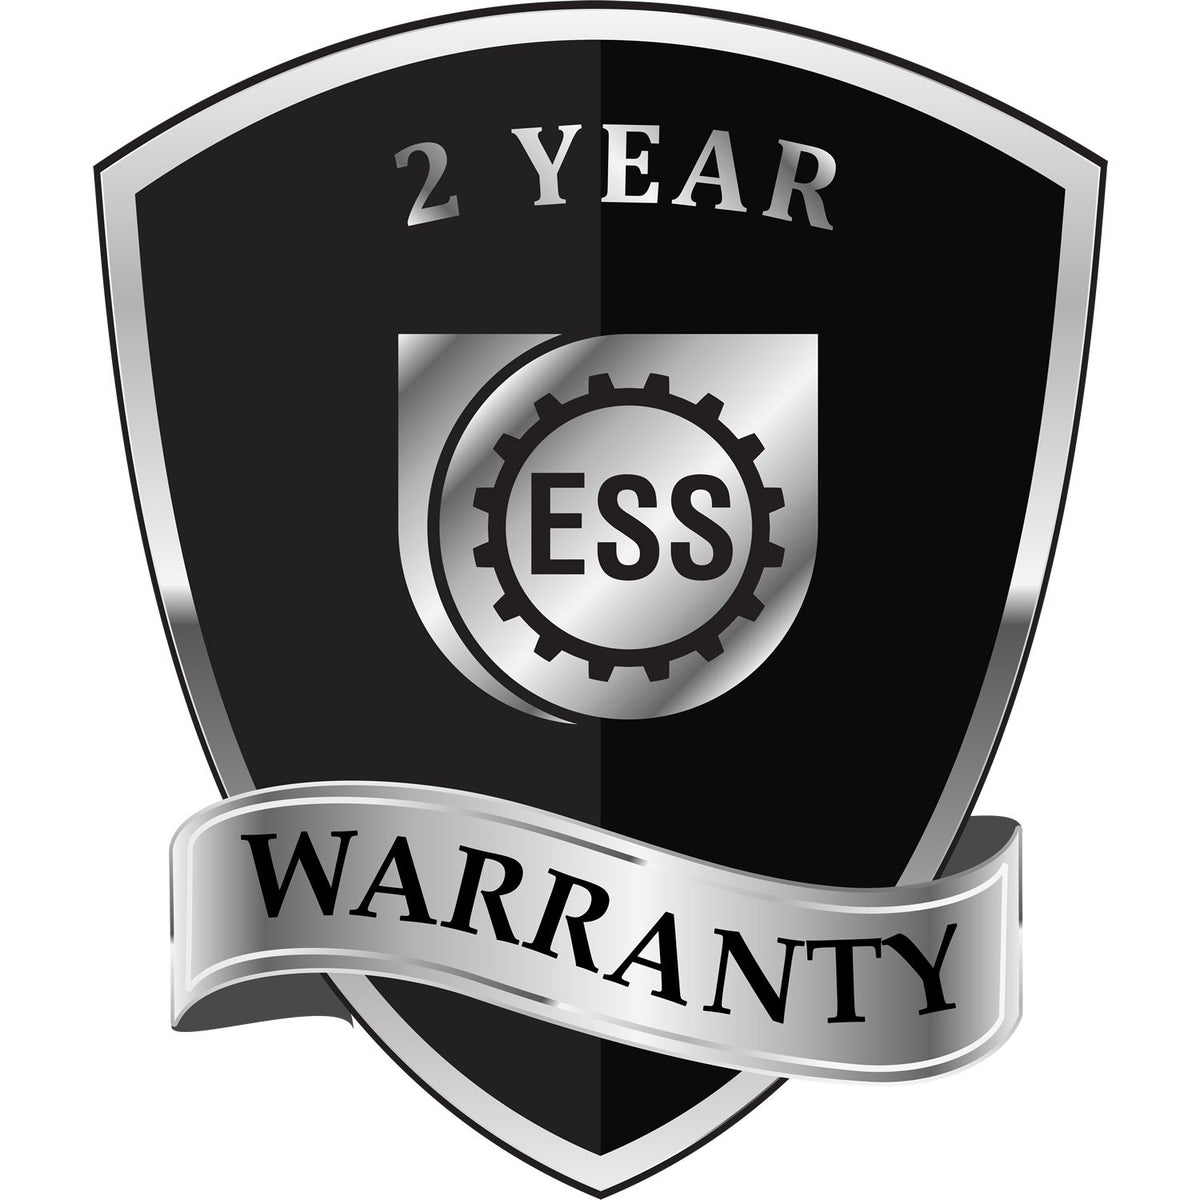 A black and silver badge or emblem showing warranty information for the Gift Montana Engineer Seal